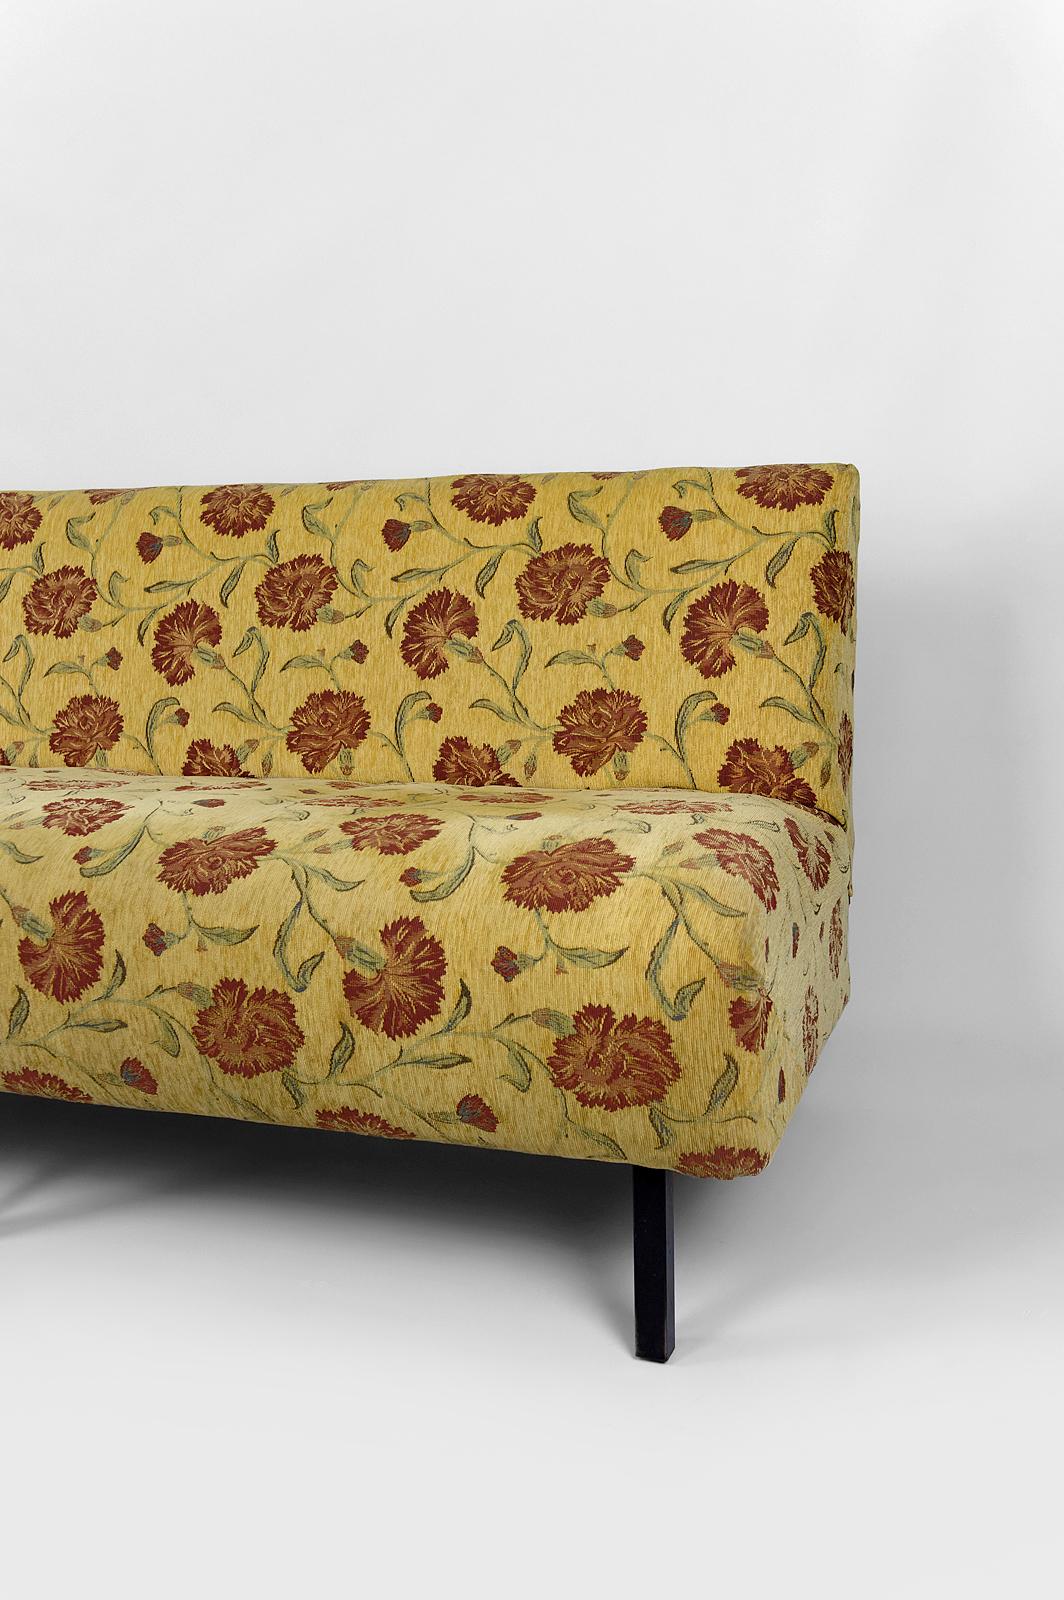 Bohemian Vintage Boho sofa with yellow and red floral fabric, France, Circa 1960 For Sale